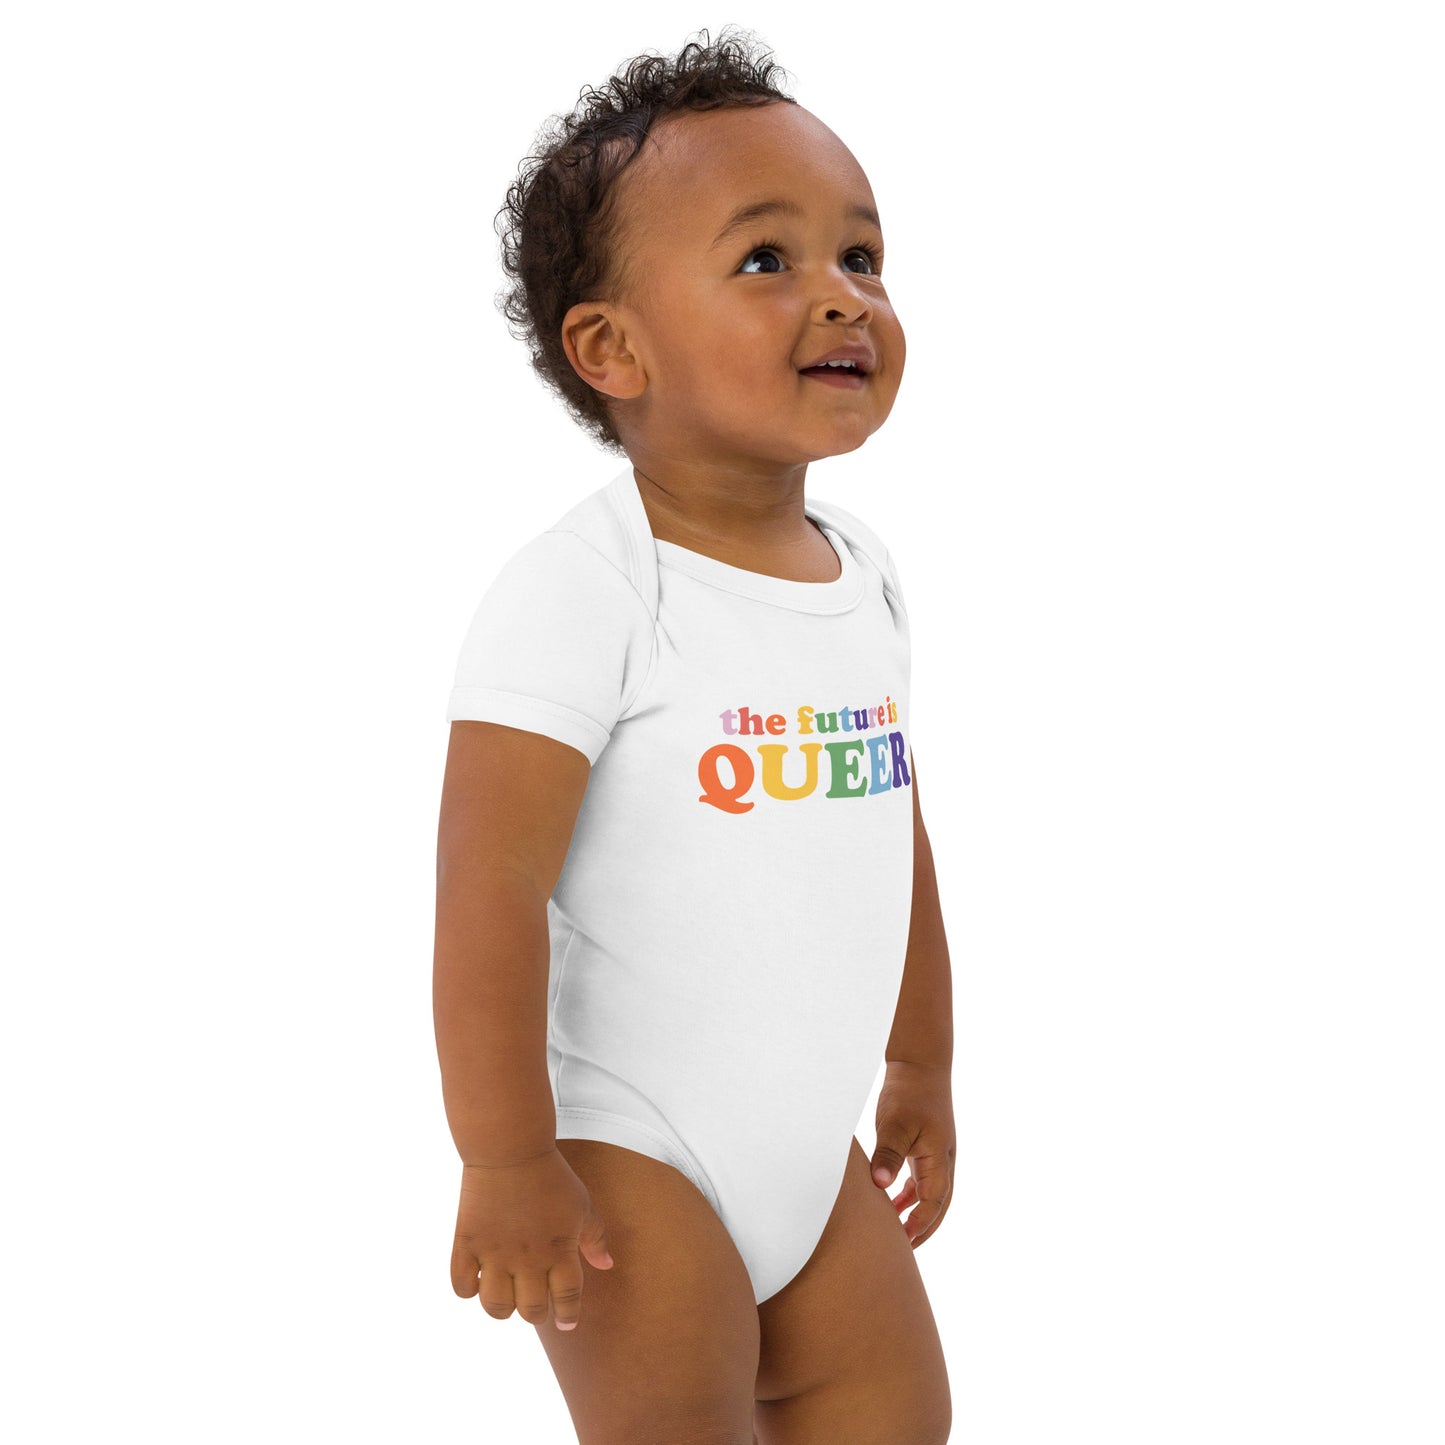 The Future is Queer Organic cotton baby bodysuit